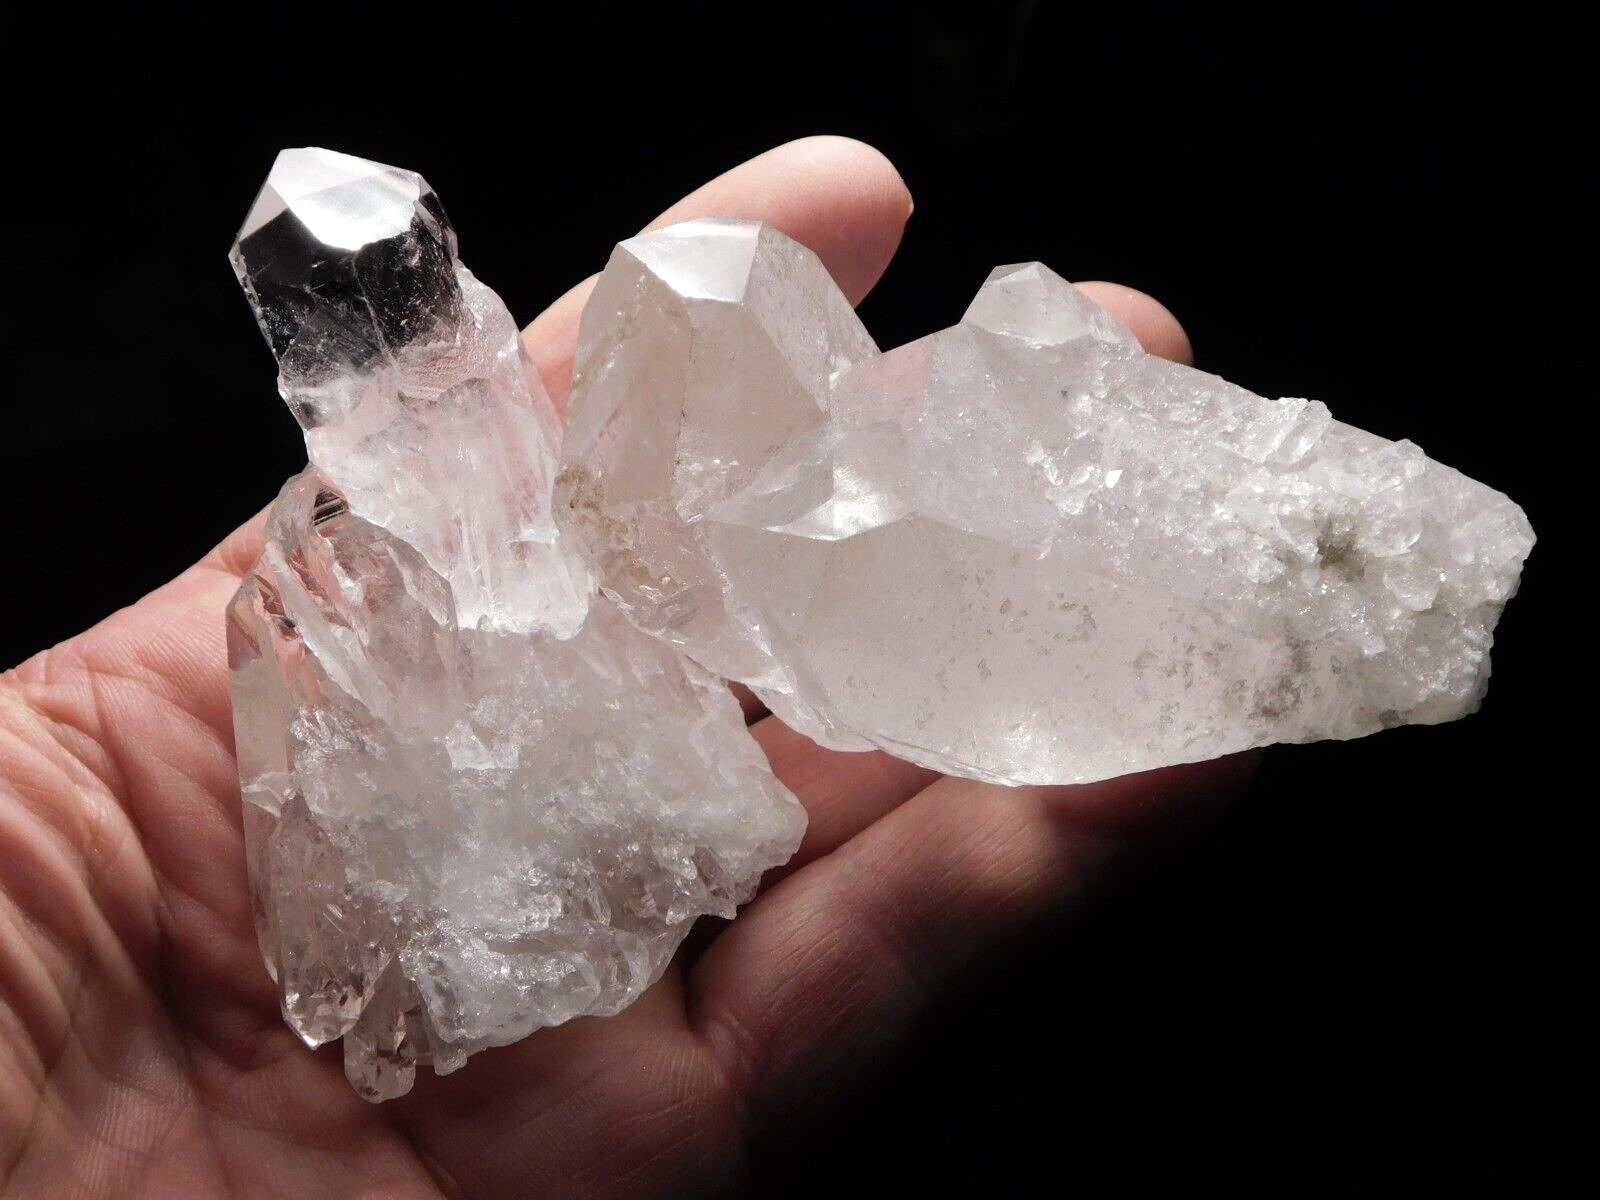 TWO 100% Natural Quartz Crystal Clusters From Brazil 253gr